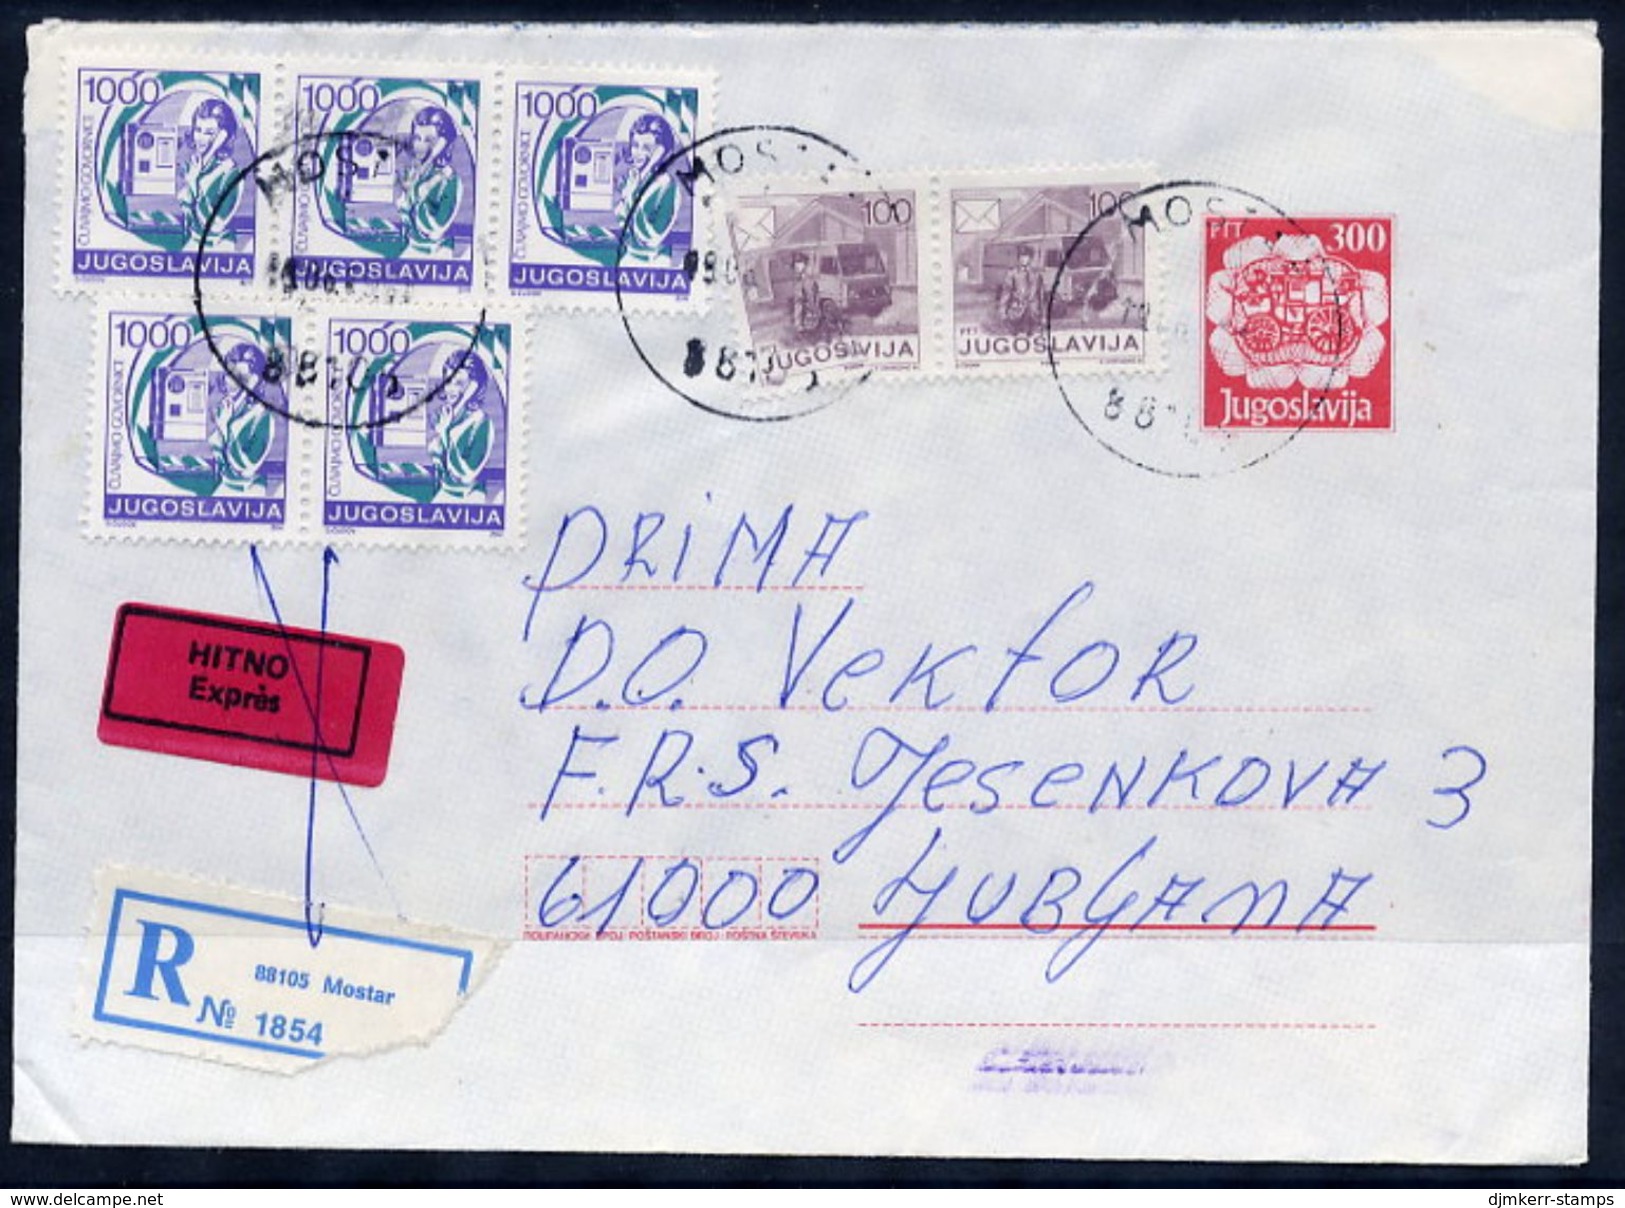 YUGOSLAVIA 1989 Mailcoach 300 D.envelope Used With Additional Franking And Express Label (Croatian).  Michel U89 - Ganzsachen